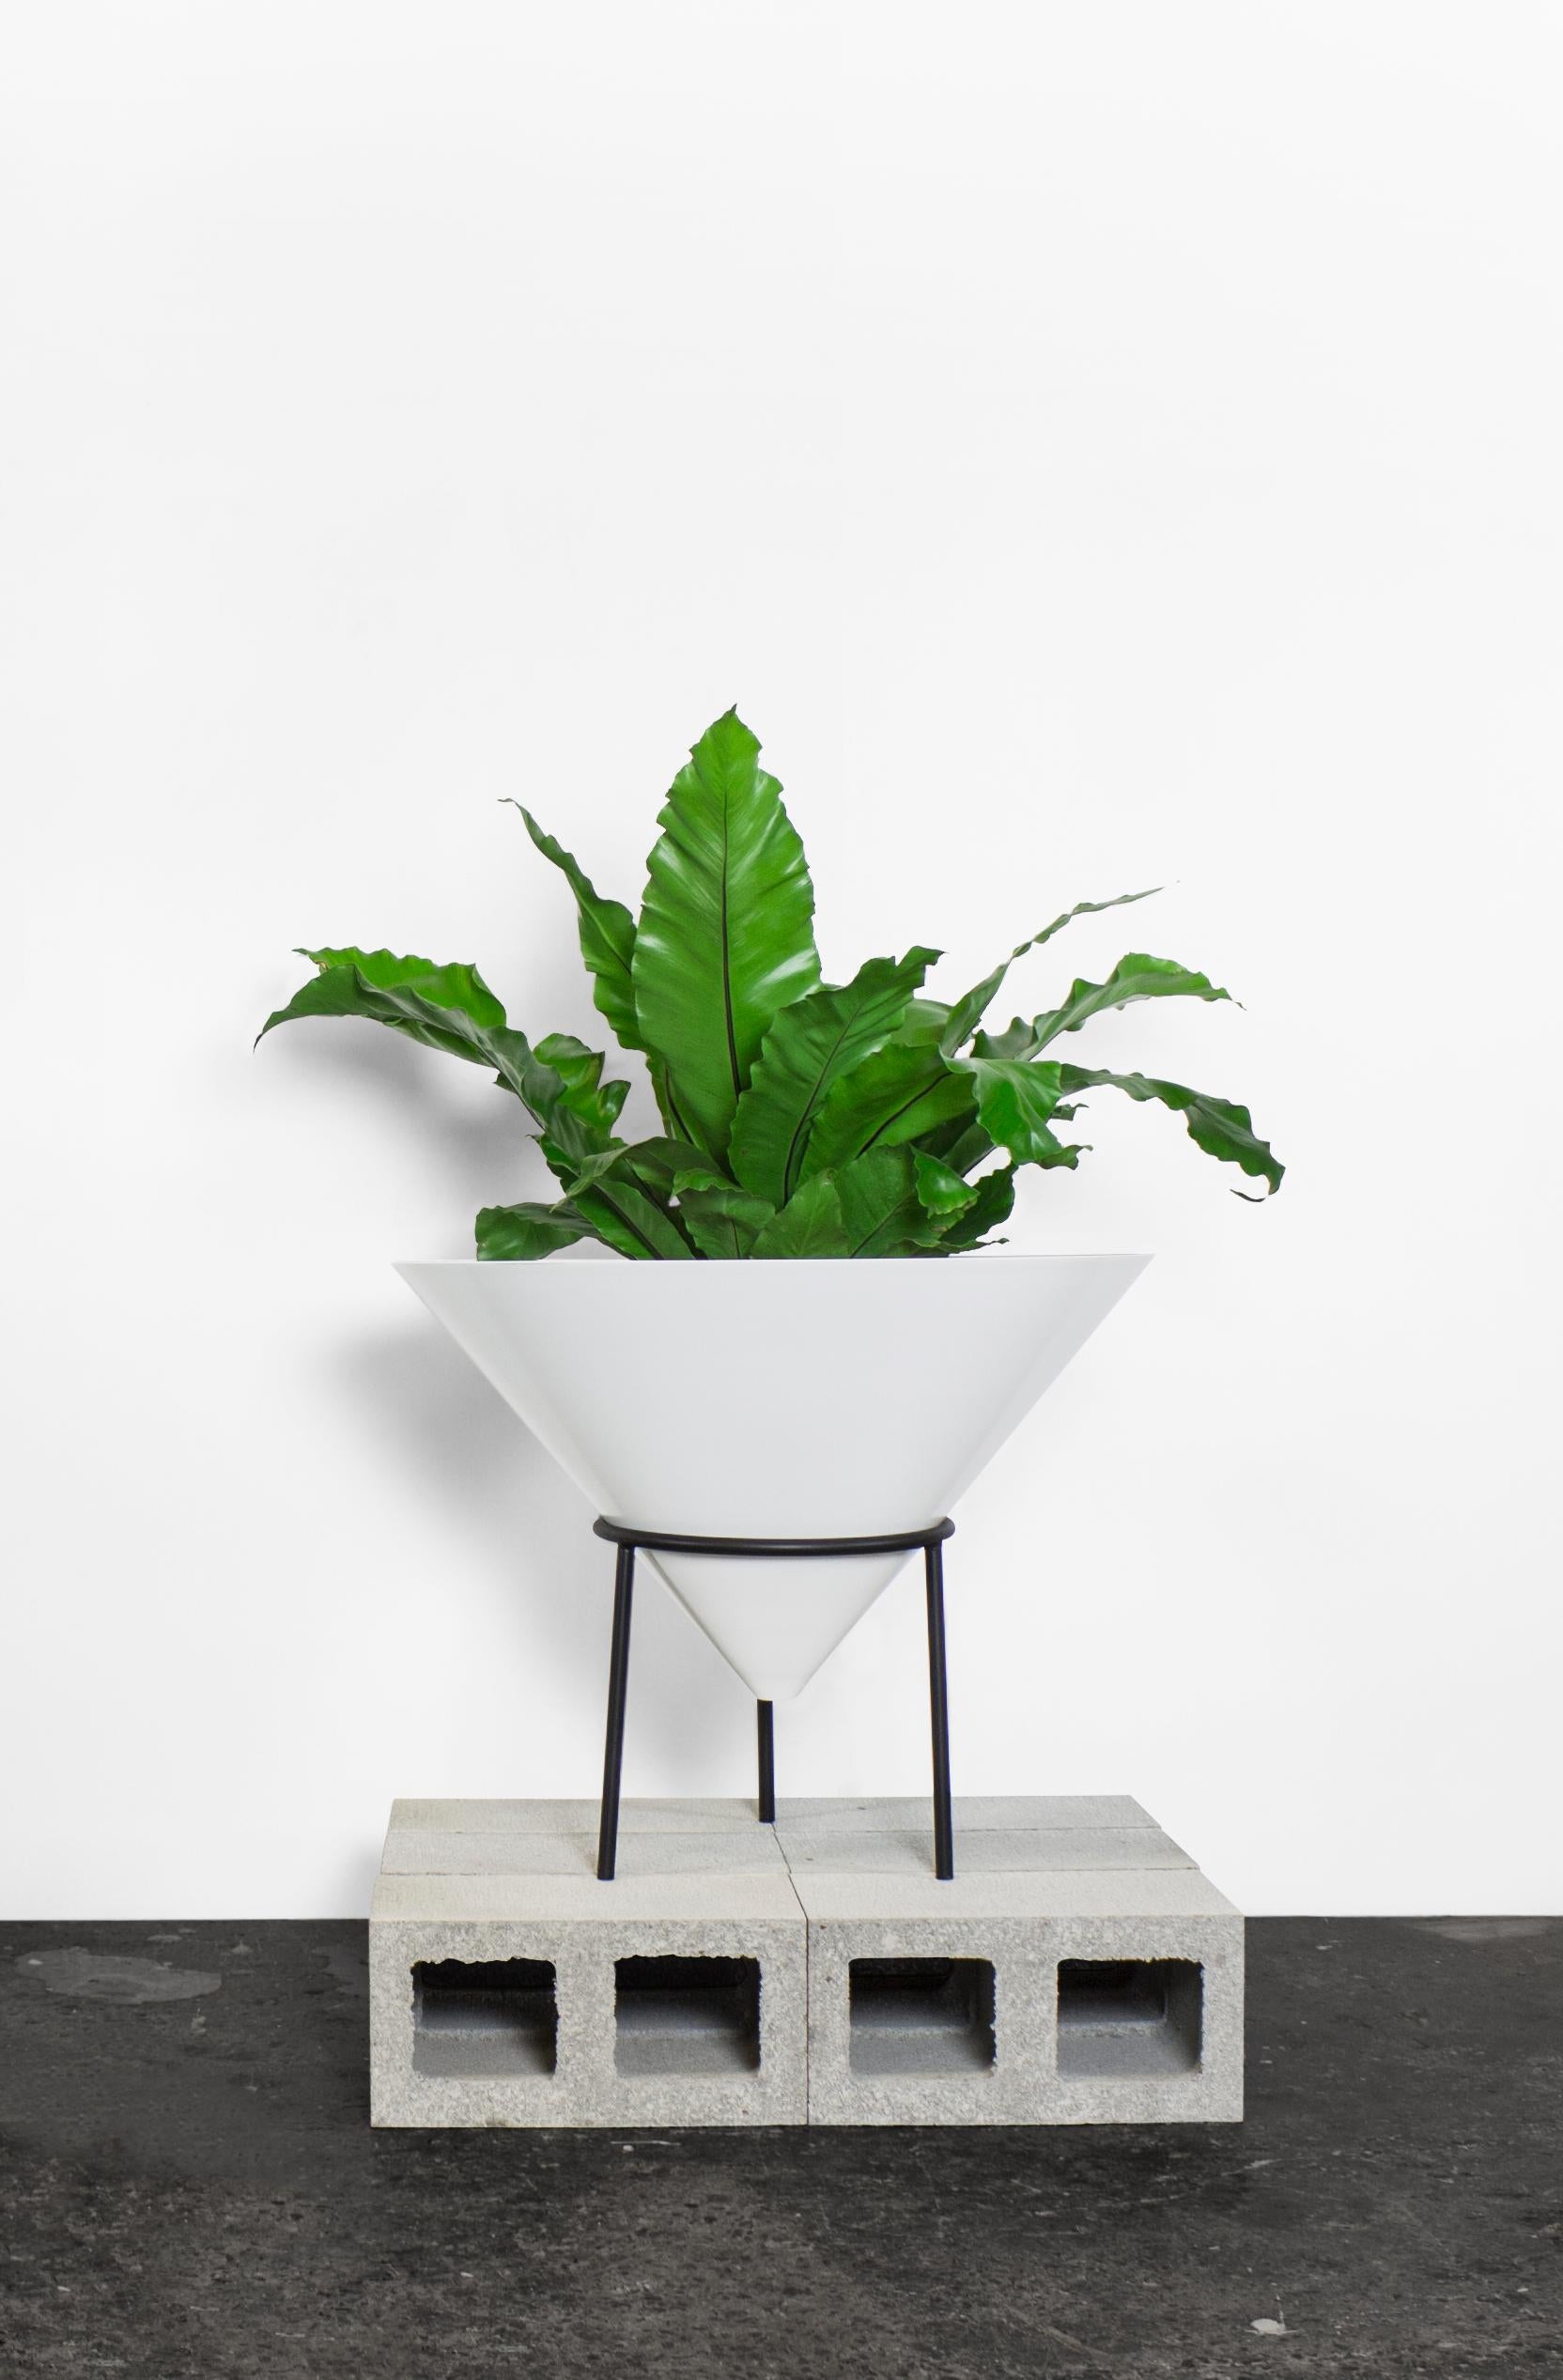 Midcentury design reimagined.

Taking inspiration from his grandmothers french plant stands, designer Joe Chester has lovingly re-mixed the design to bring it into a modern context that still references its roots. And so Nancy was born.

Worked